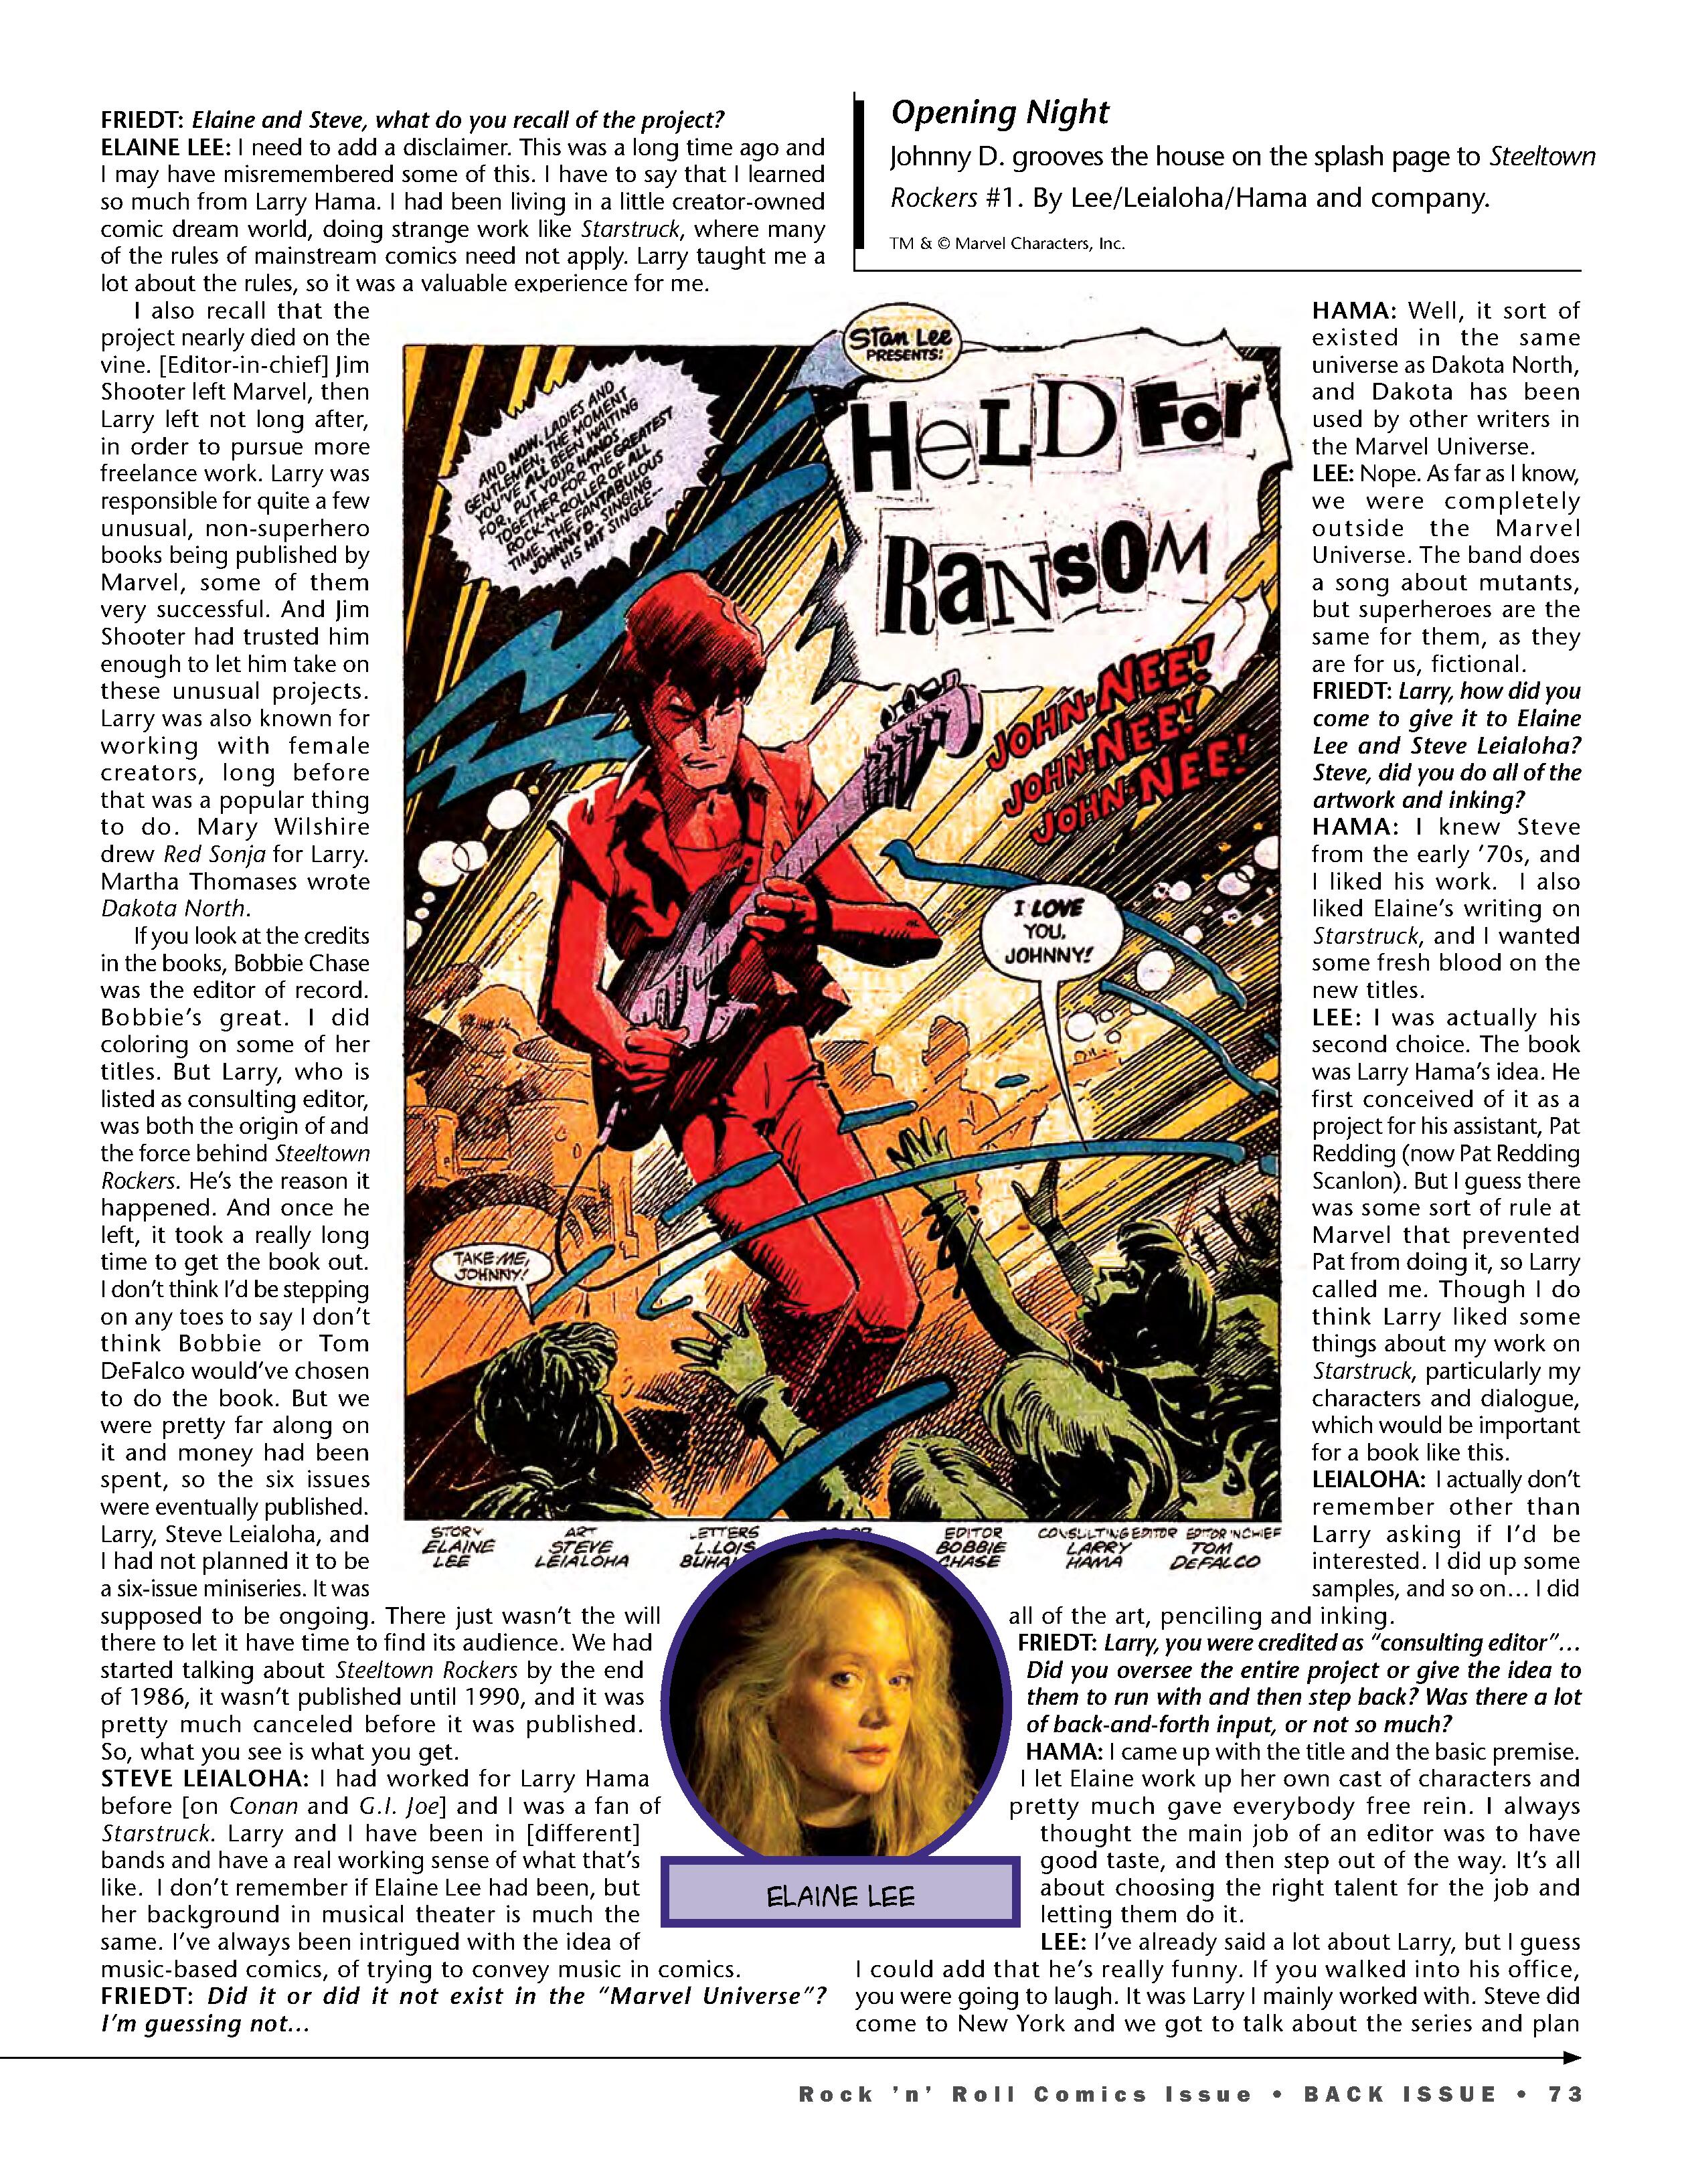 Read online Back Issue comic -  Issue #101 - 75